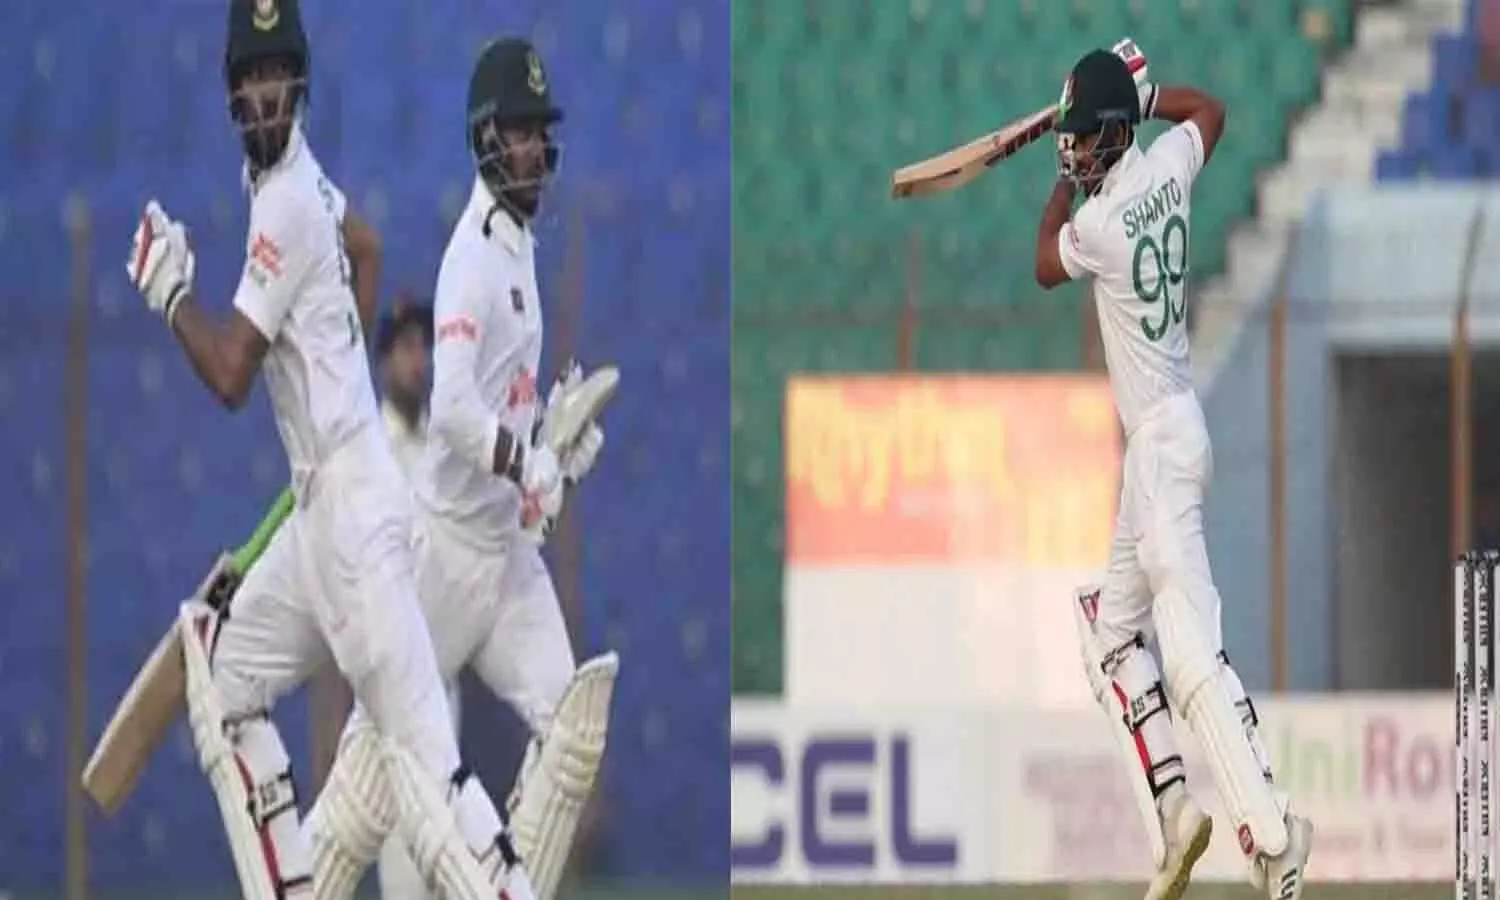 IND vs BAN Test Day 4 Live Score